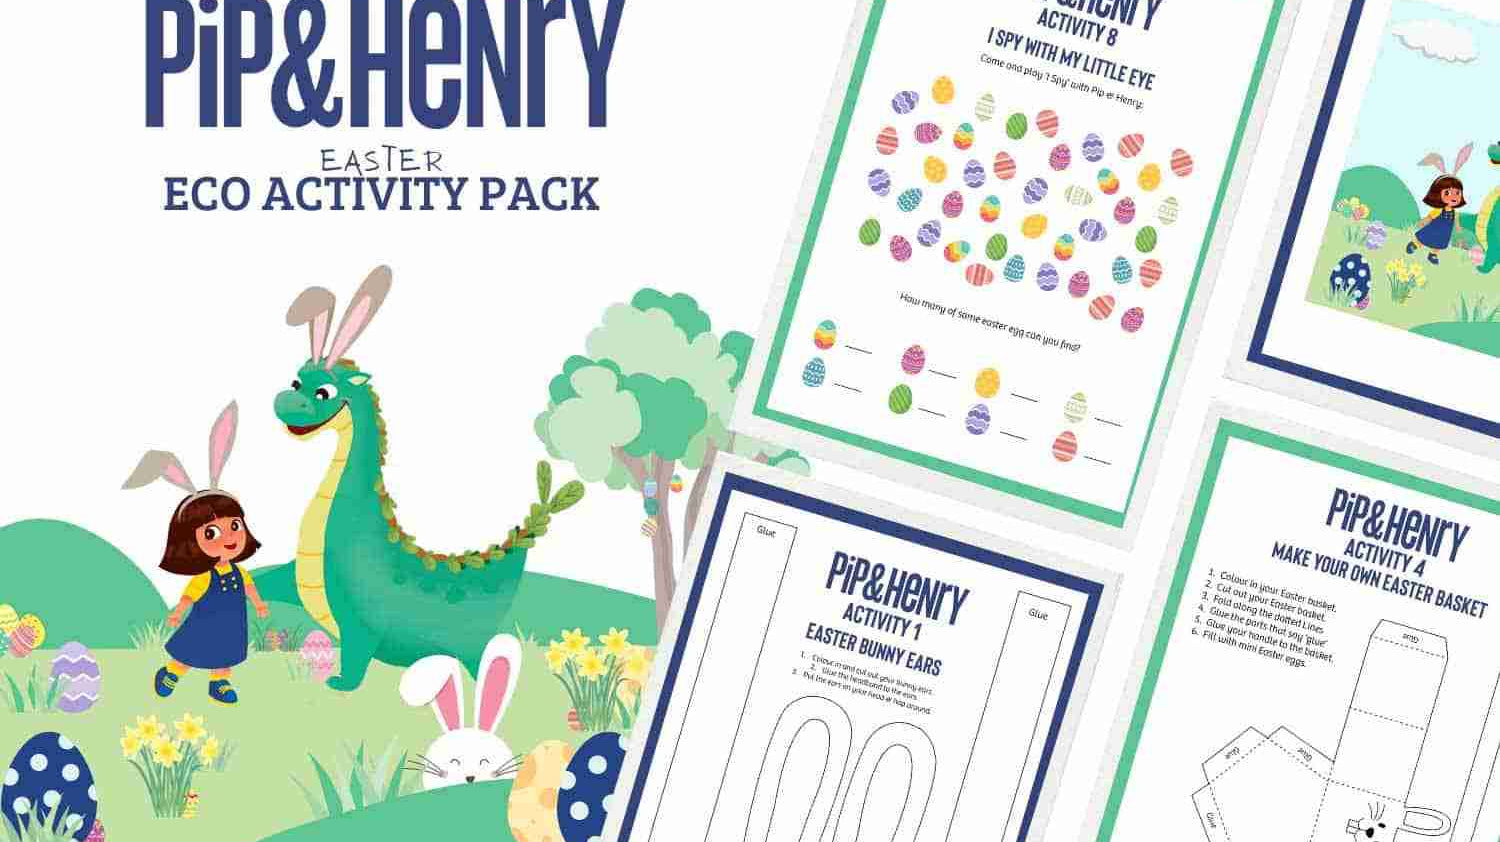 Our ‘Eggcellent’ Easter Eco Activity Pack Is Here!